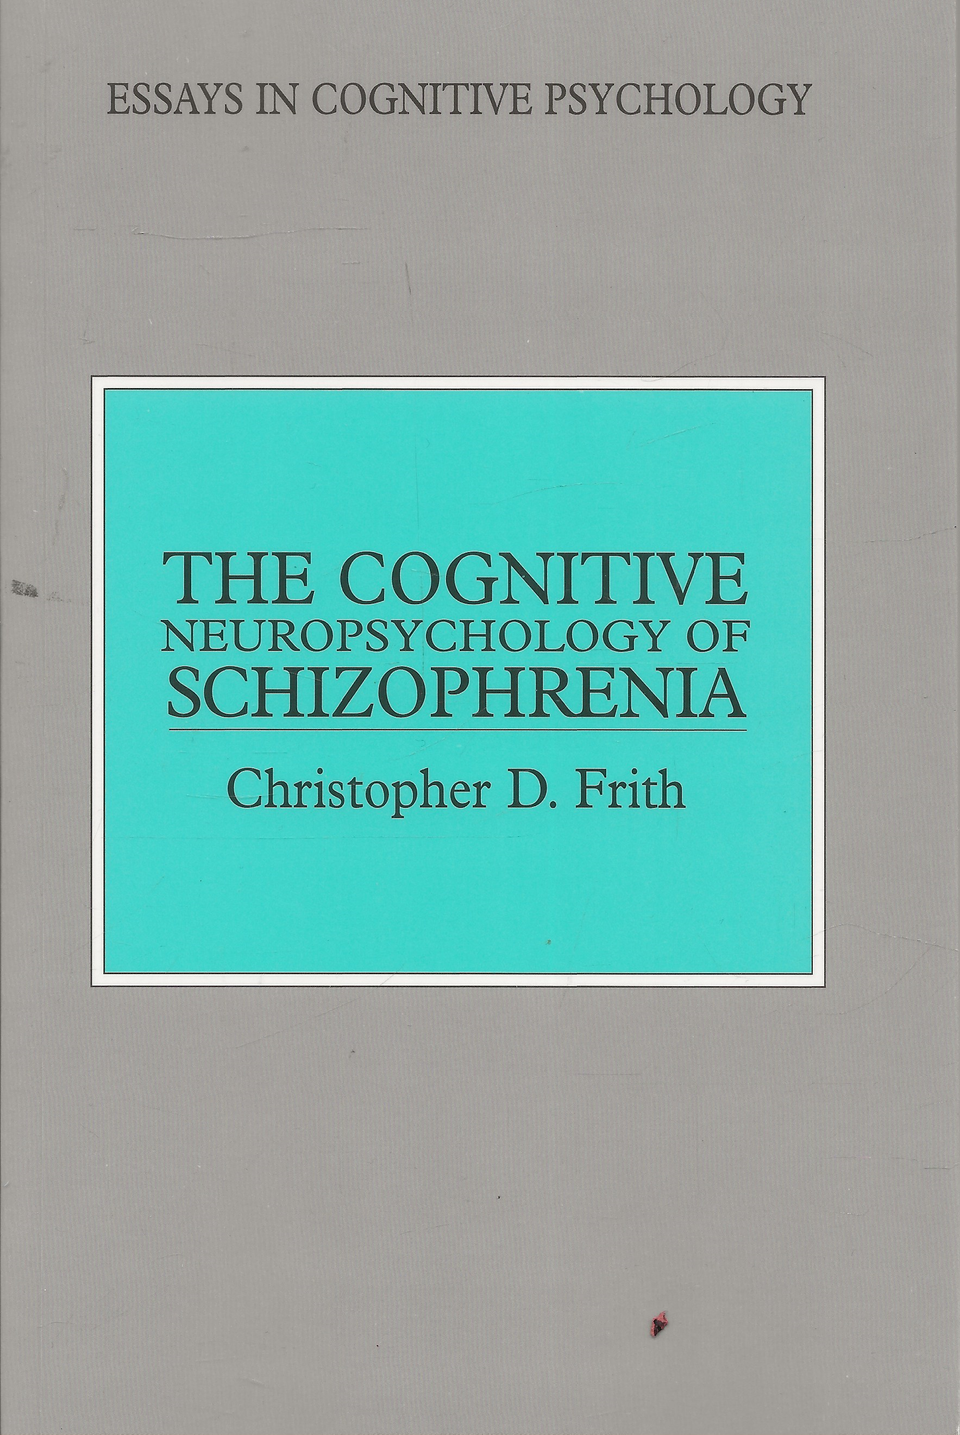 Christopher D. Frith: The Cognitive Neuropsychology of Schitzophrenia.